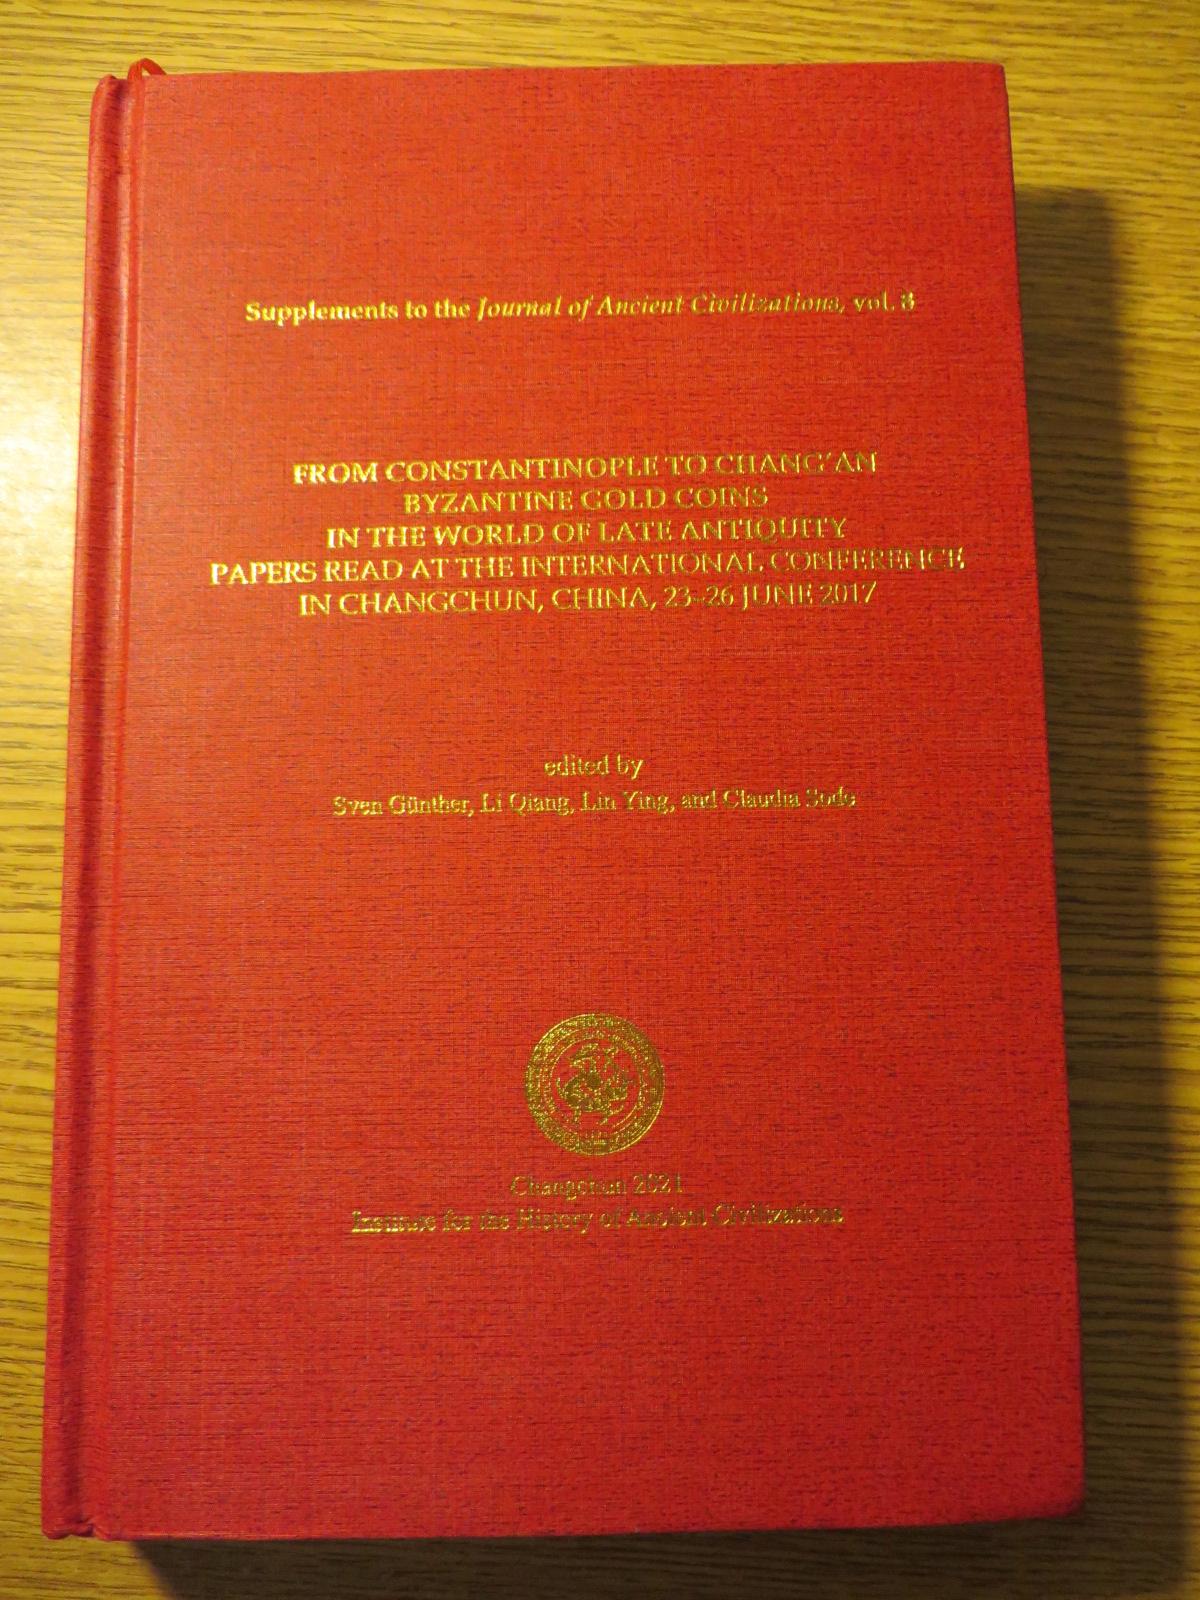 Cover of Sven Günther, Li Qiang, Lin Ying and Claudia Sode (edd.), From Constantinople to Chang’an: Byzantine Gold Coins in the World of Late Antiquity. Papers Read at the International Conference in Changchun, China, 23‒26 June 2017, Supplements to the Journal of Ancient Civilizations 8 (Changchun 2021)